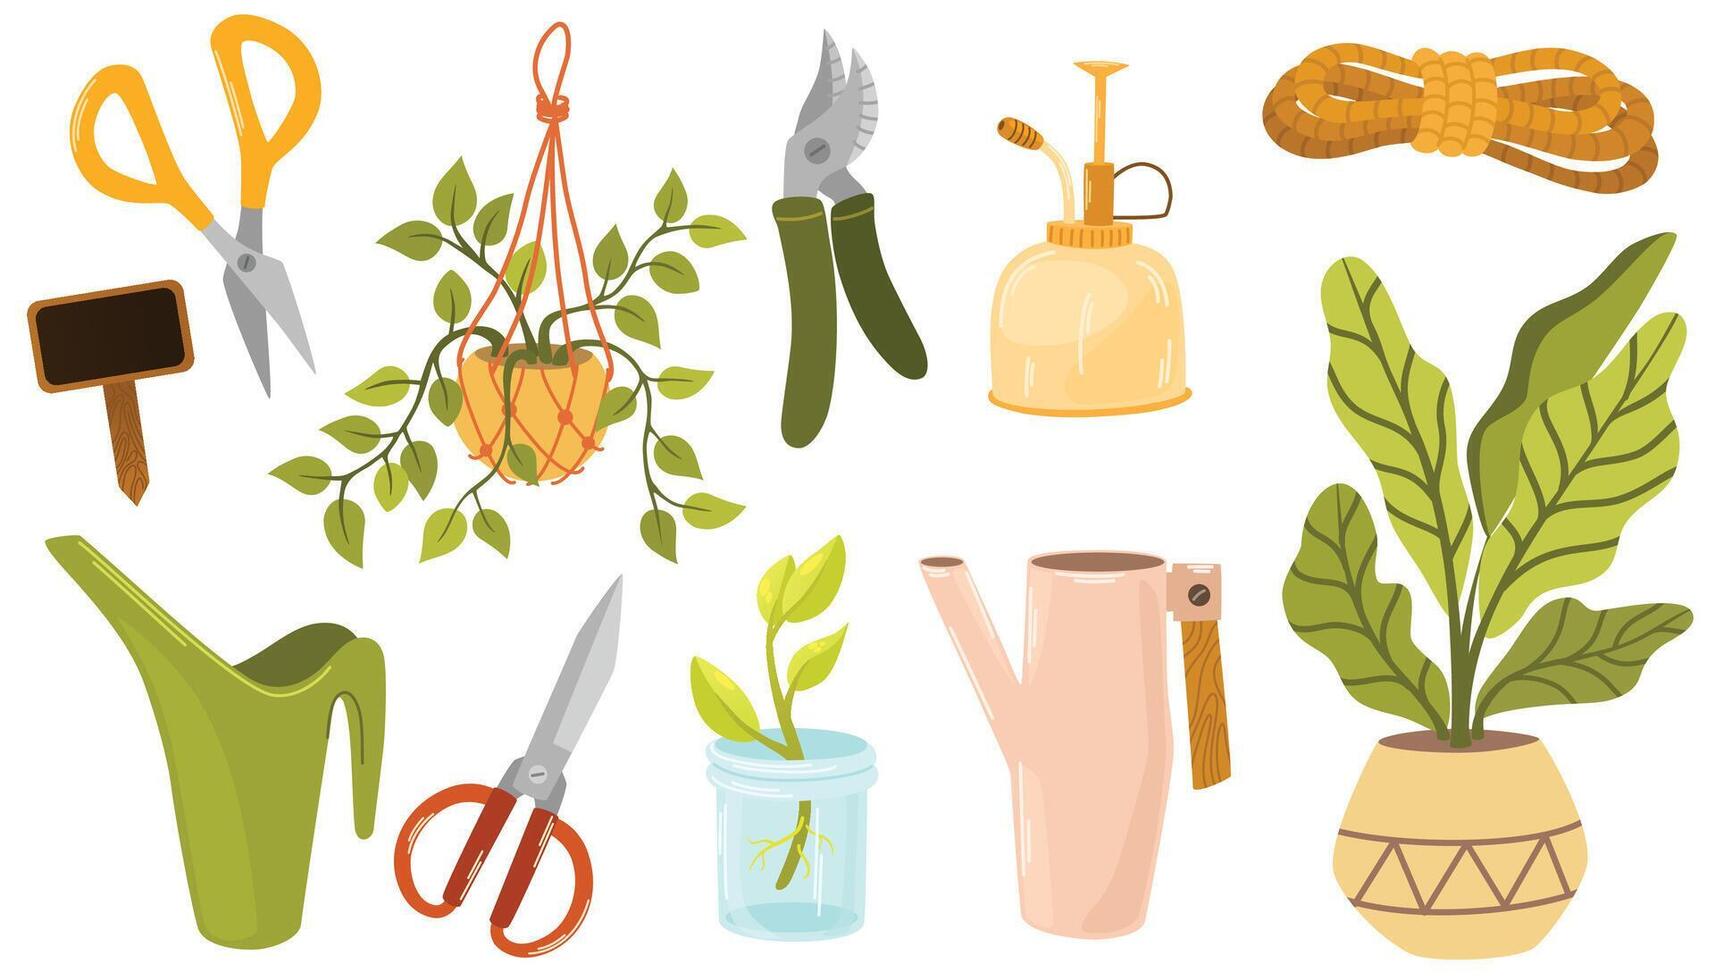 Gardening tools and plants in pots set. Bundle of equipment for home plants. Flat cartoon vector illustrations isolated on white